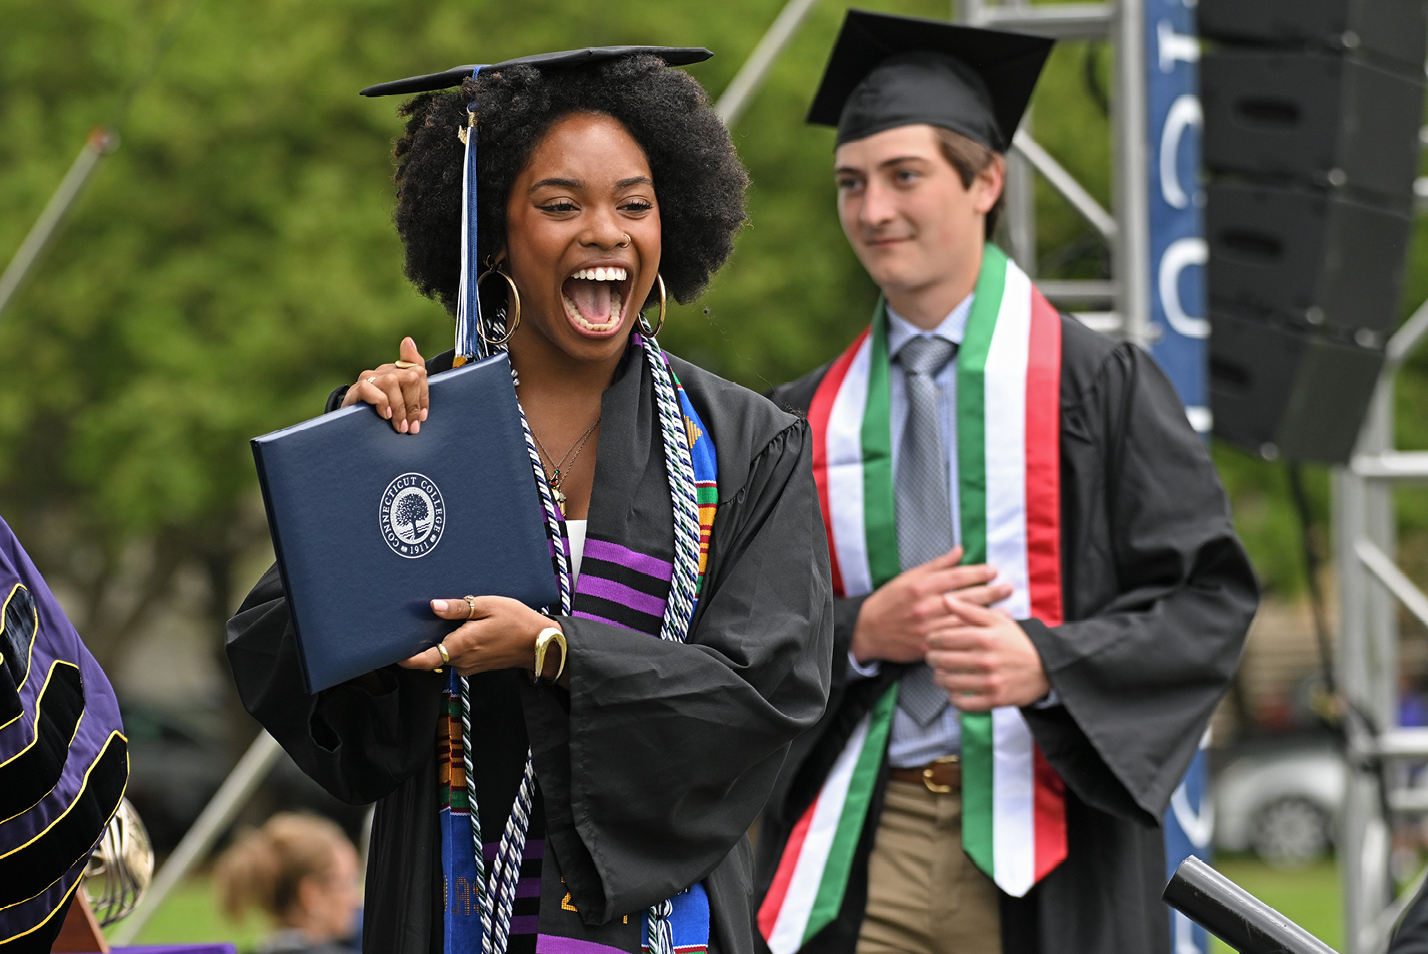 A student holds up a diploma after walking across the stage.